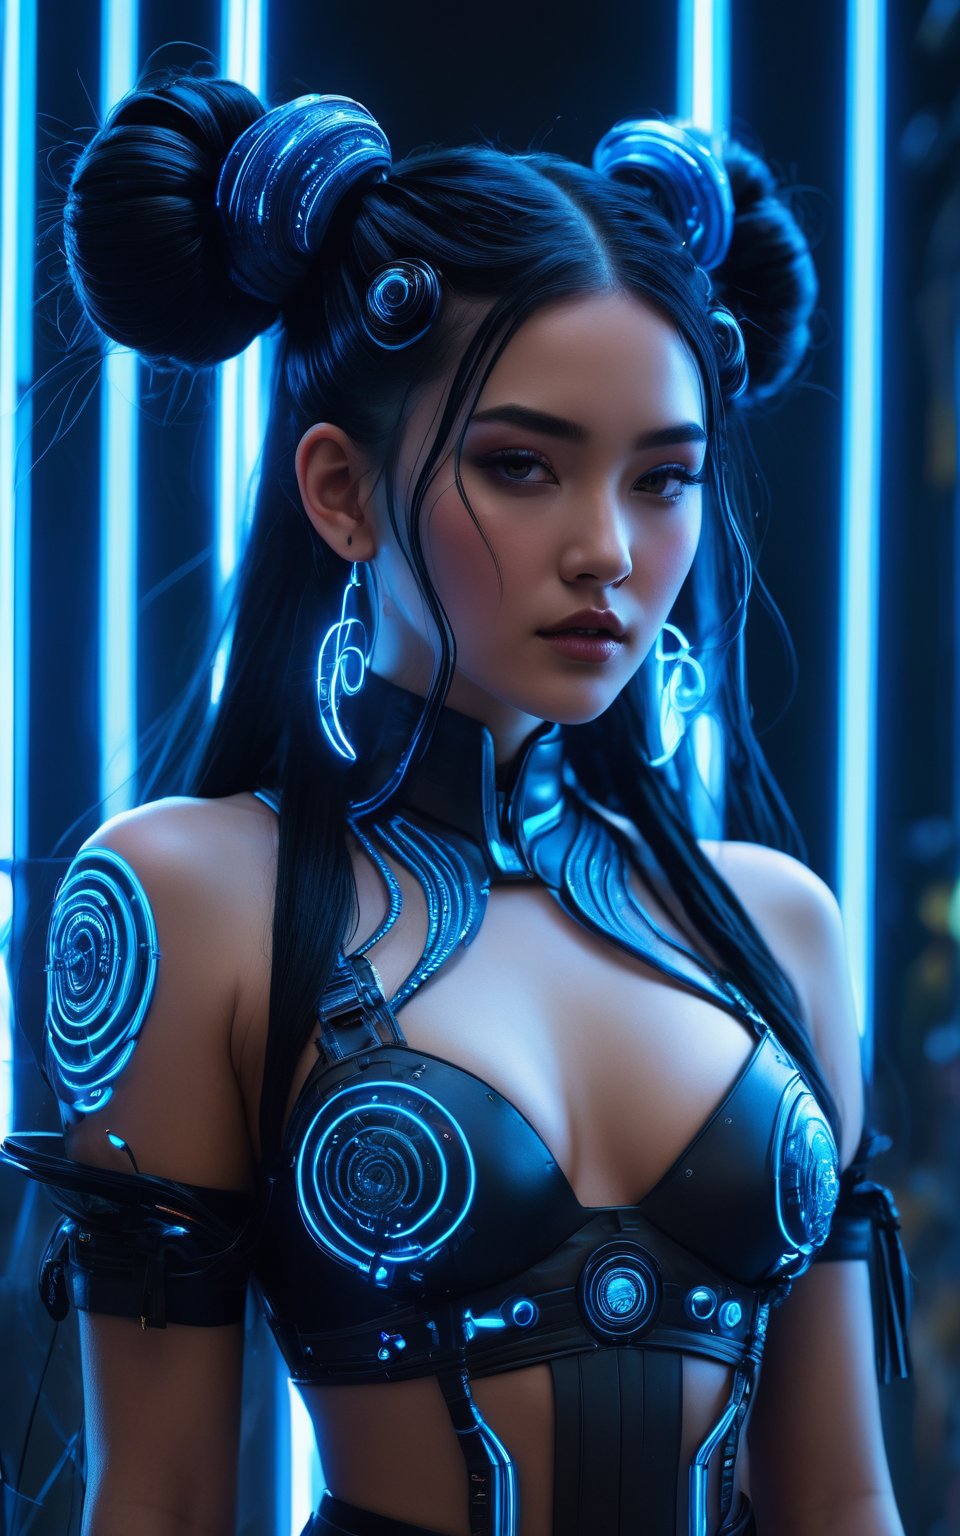 (best quality,8K,highres,masterpiece), ultra-detailed, cyberpunk woman adorned with long black hair fashioned into space buns. In this ethereal scene, she embodies the role of the goddess of horticulture, surrounded by millions of microscopic, ultra-bright blue neon strings emanating from her form. composition showcases a stunningly beautiful backlit silhouette, intricately detailed and adorned with neon clouds, creating a mesmerizing and vivid blue color palette.